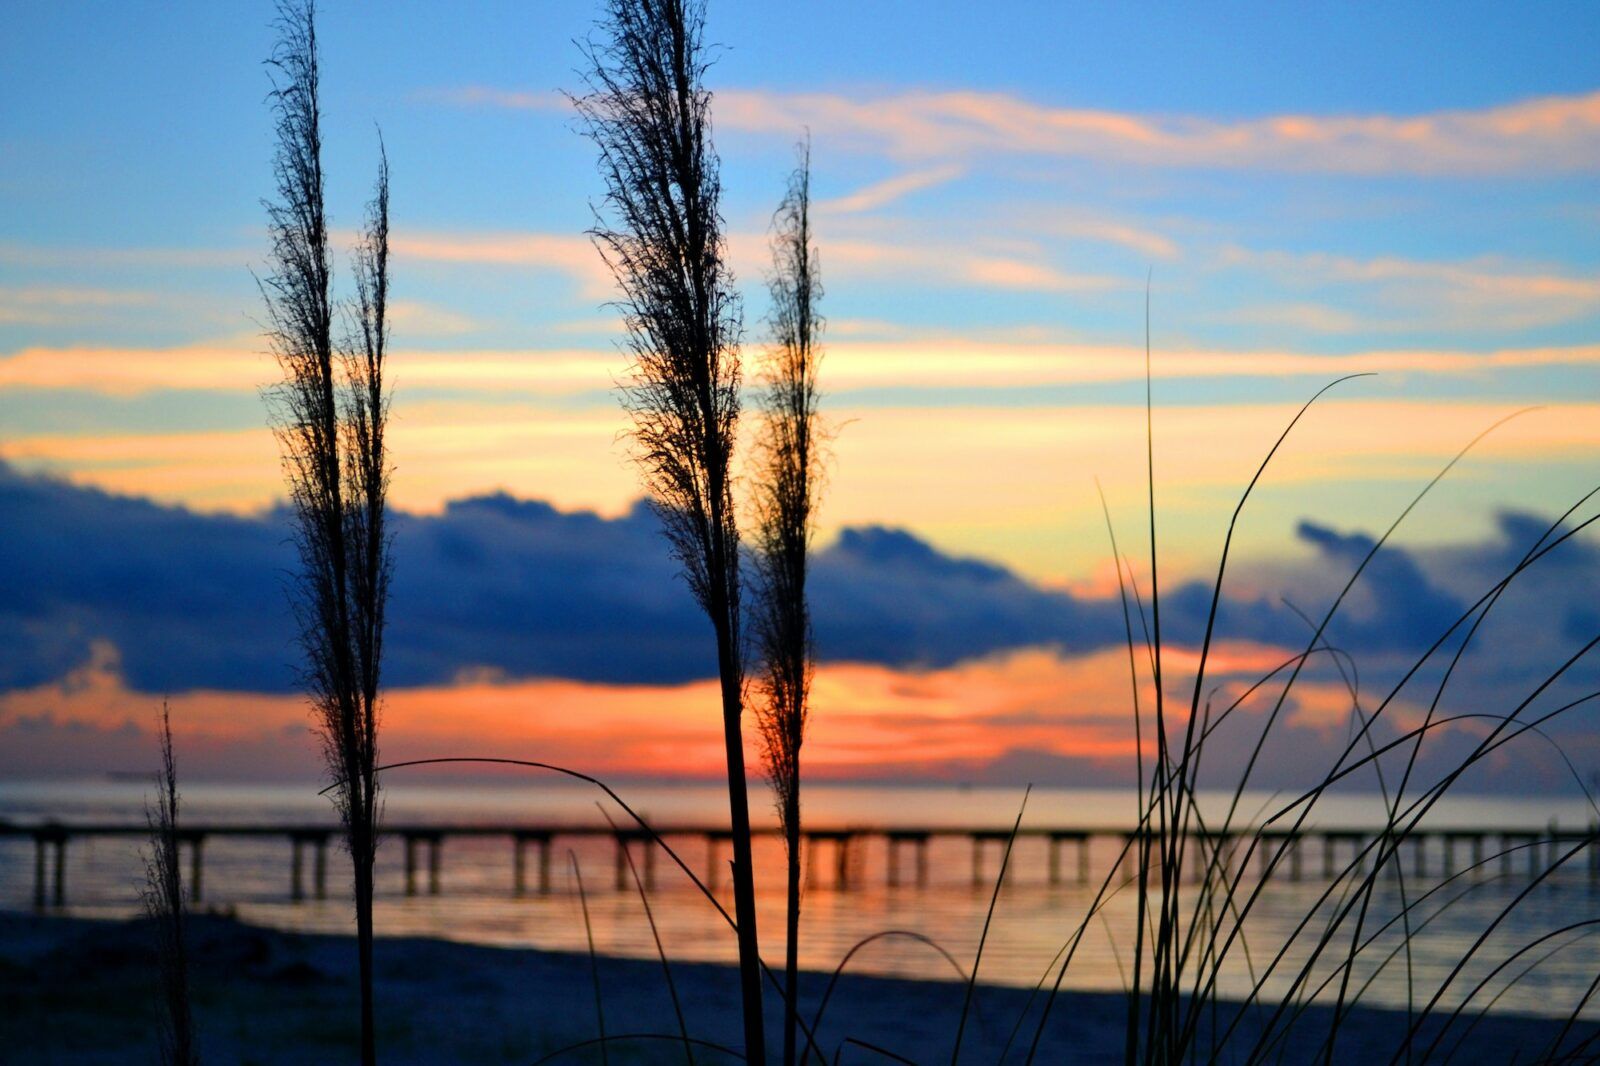 Sunrise or sunset on the Chesapeake Bay, VA with sea grass silhouetted